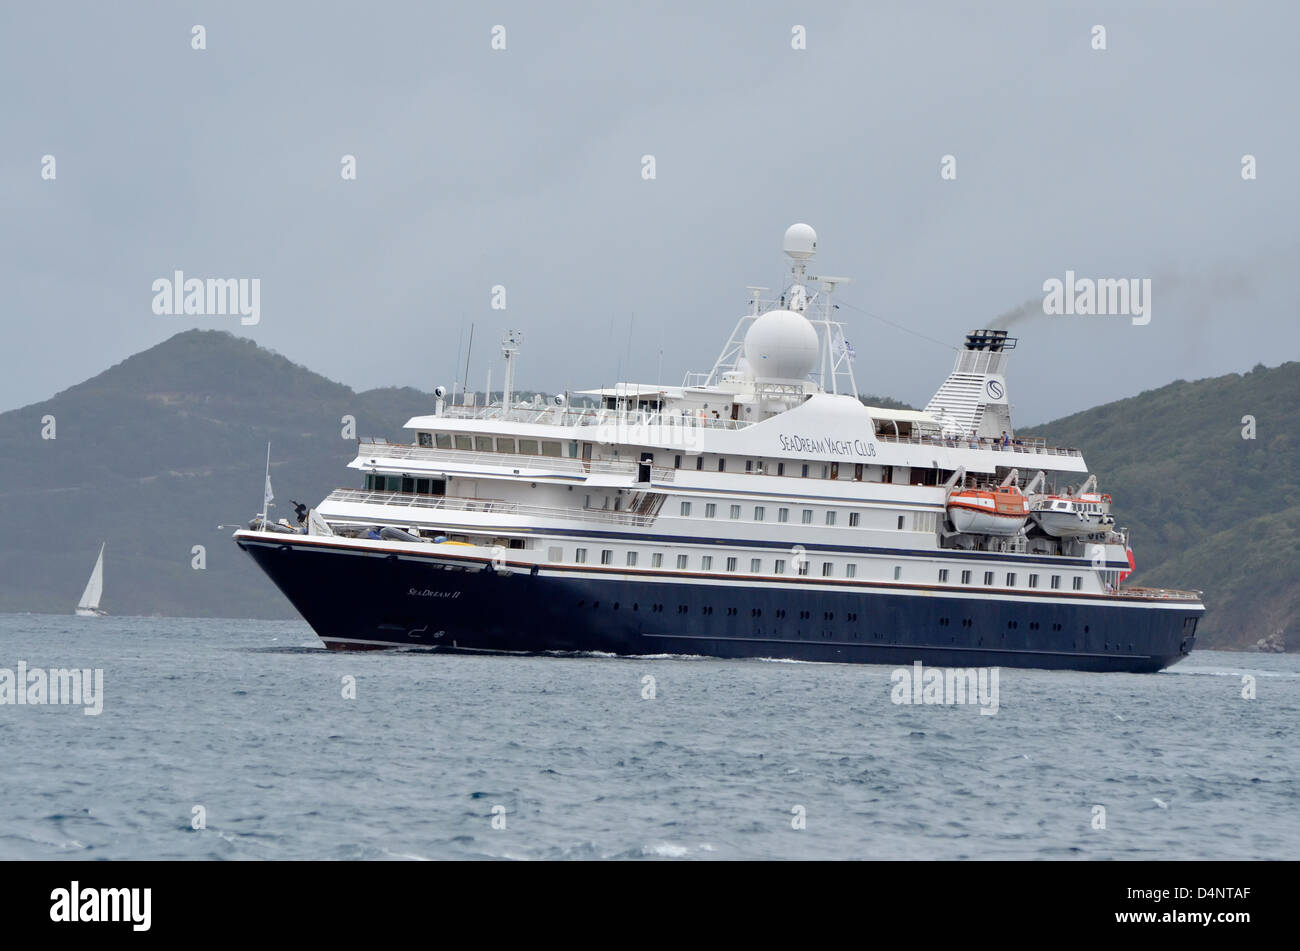 Cruise ship and sailboat in the Virgin Islands. Stock Photo